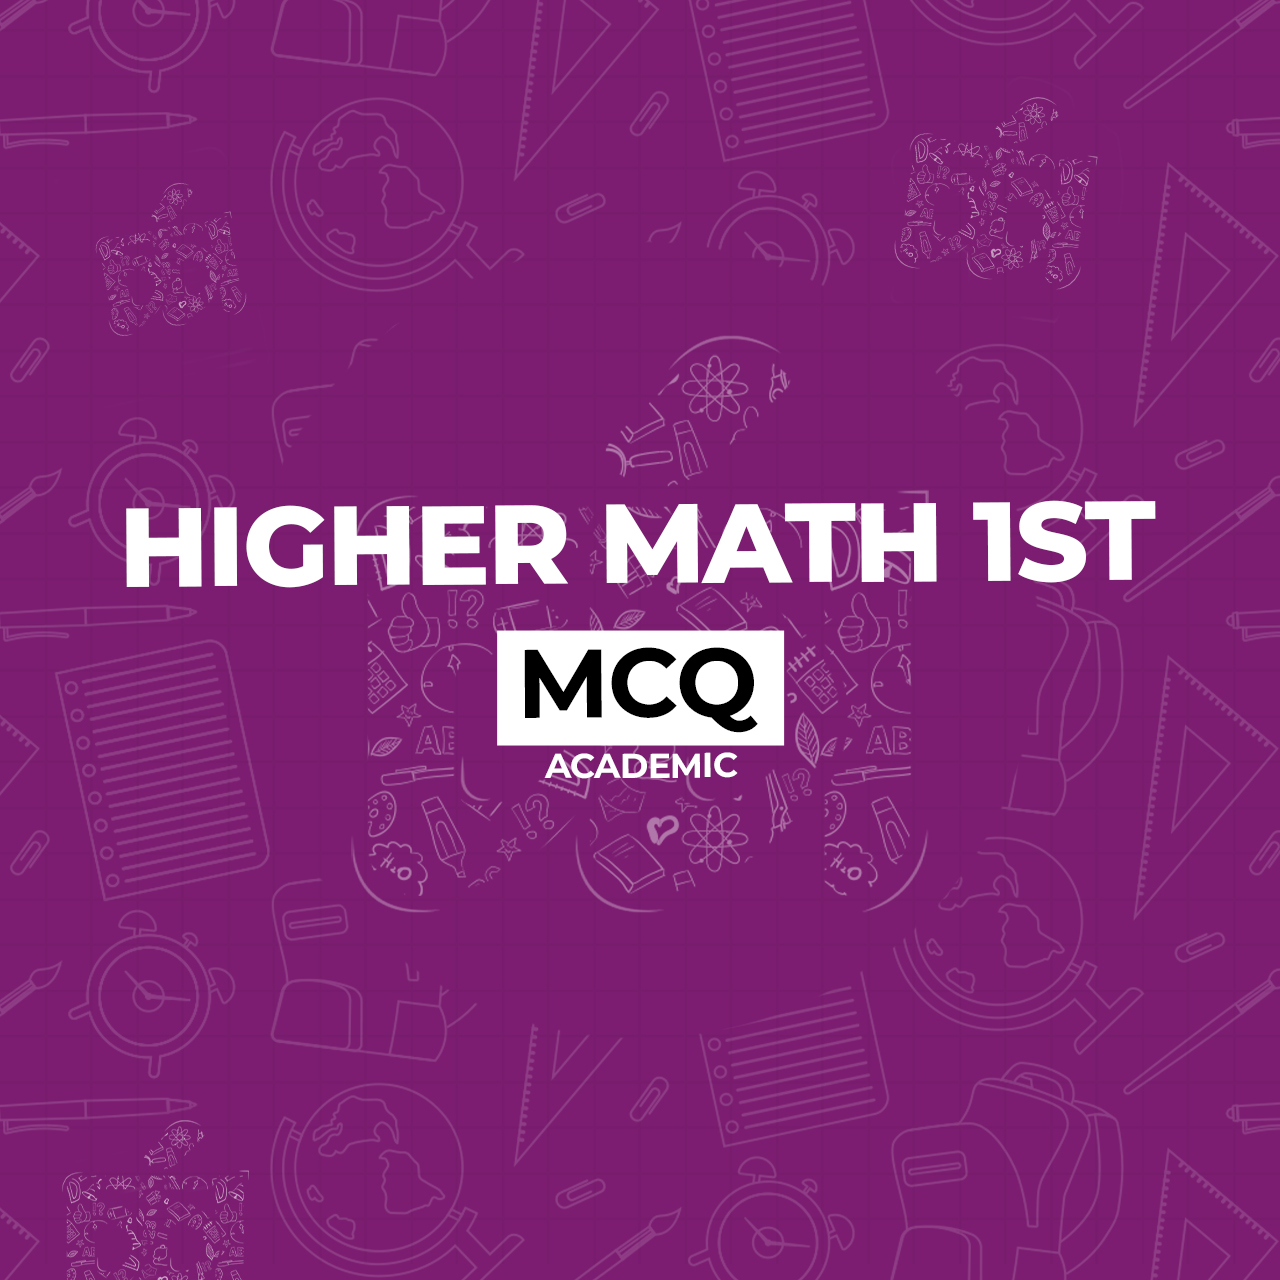 <p>HSC Higher Math 1st Paper Digital Test Paper In this digital test paper, you will find all the board questions from the Higher Math 1st Paper from 2017 to 2023 for all boards. Practice board MCQ questions now on Chorcha to secure A+ in HSC exam and stay ahead in admission test!</p>